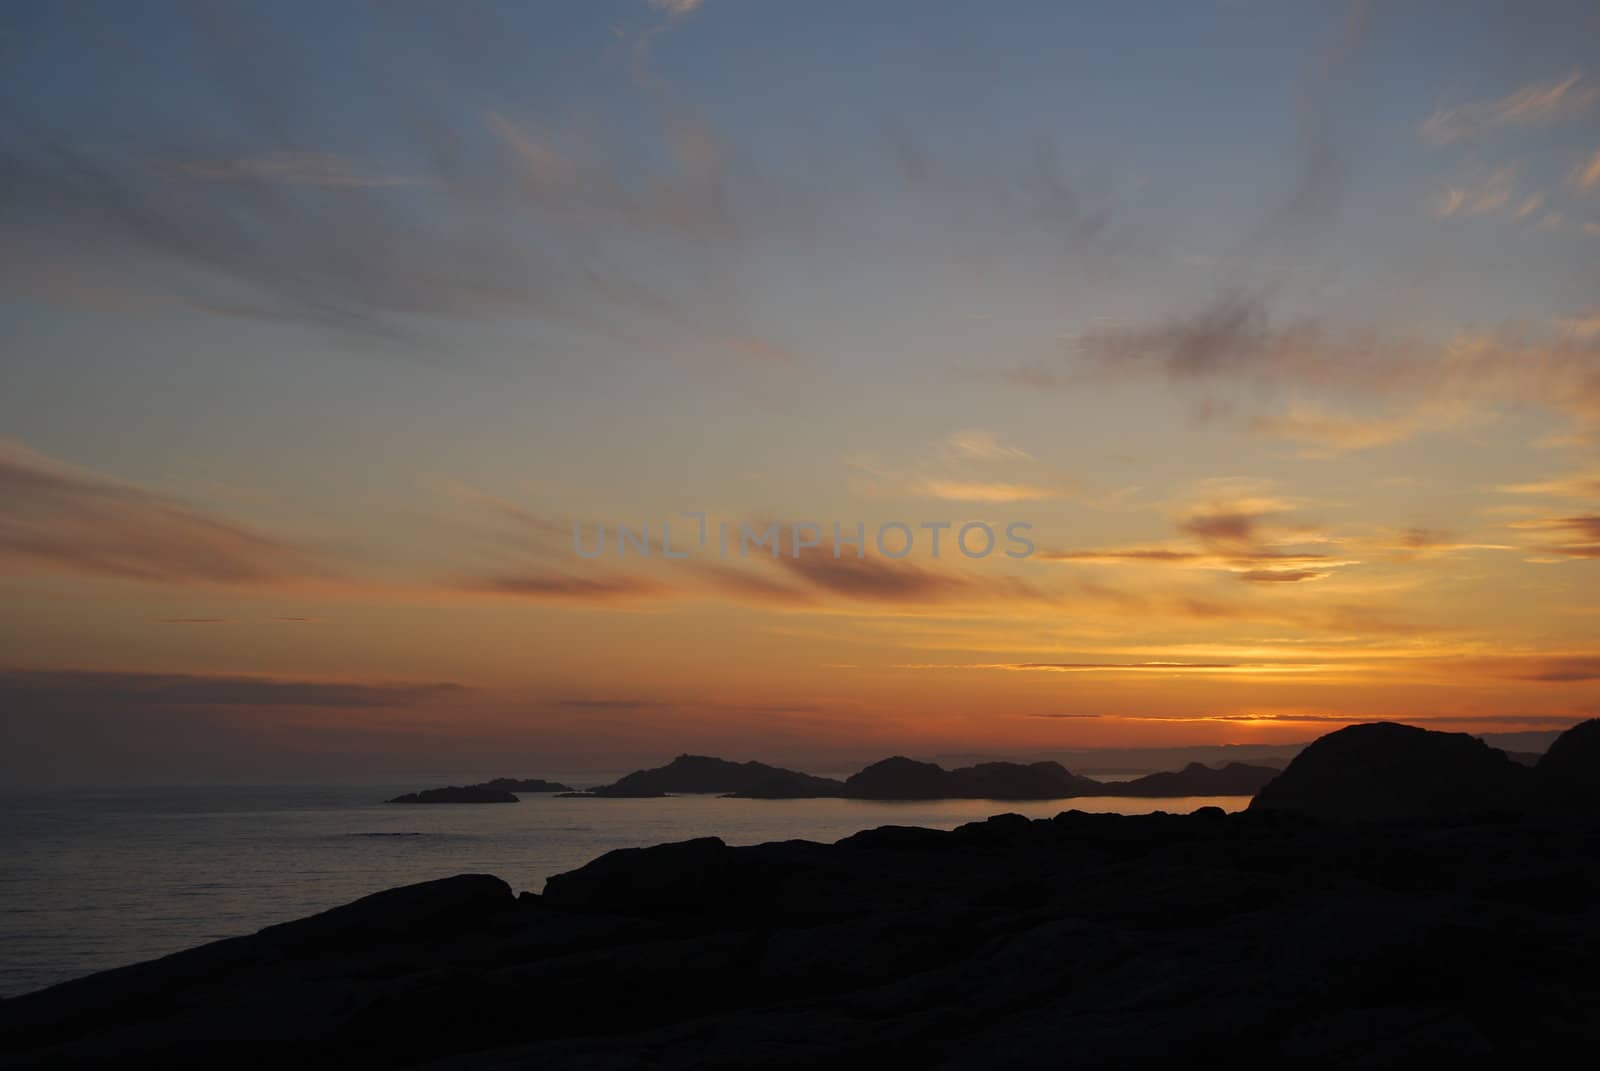 Sunset on the south end of Norway, Lindesnes Fyr.